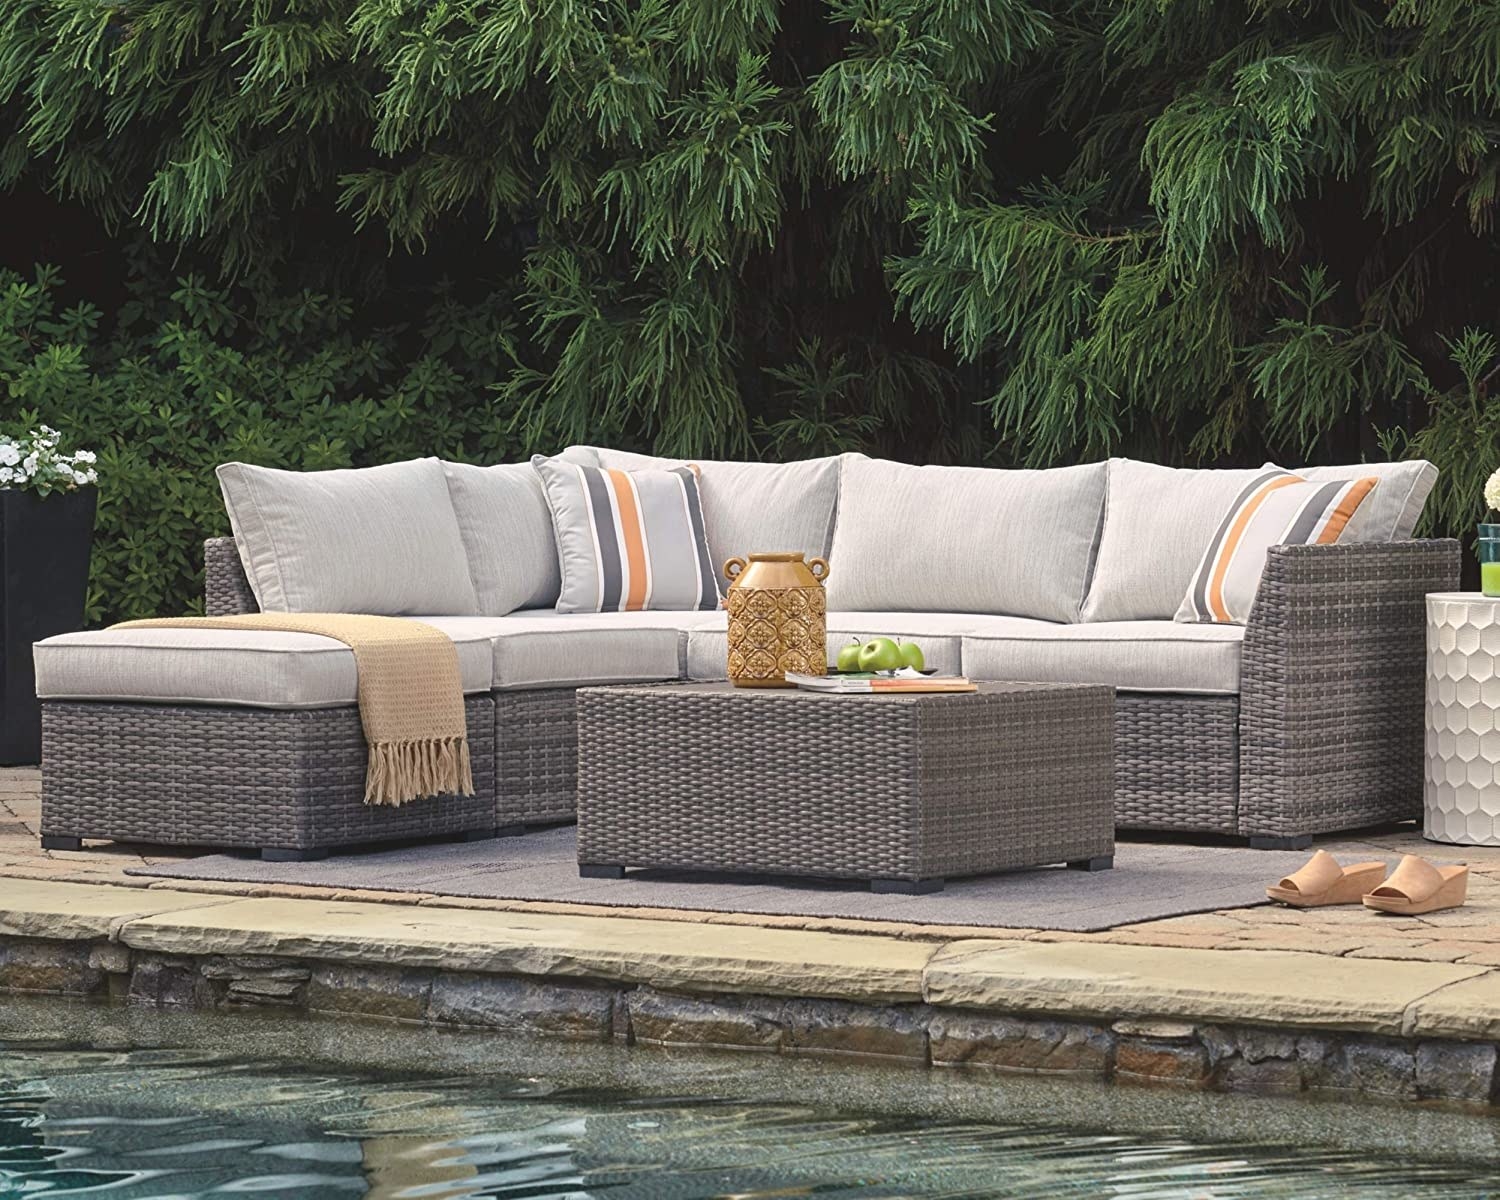 the four-piece set with couch, sectional ottomans, and side table